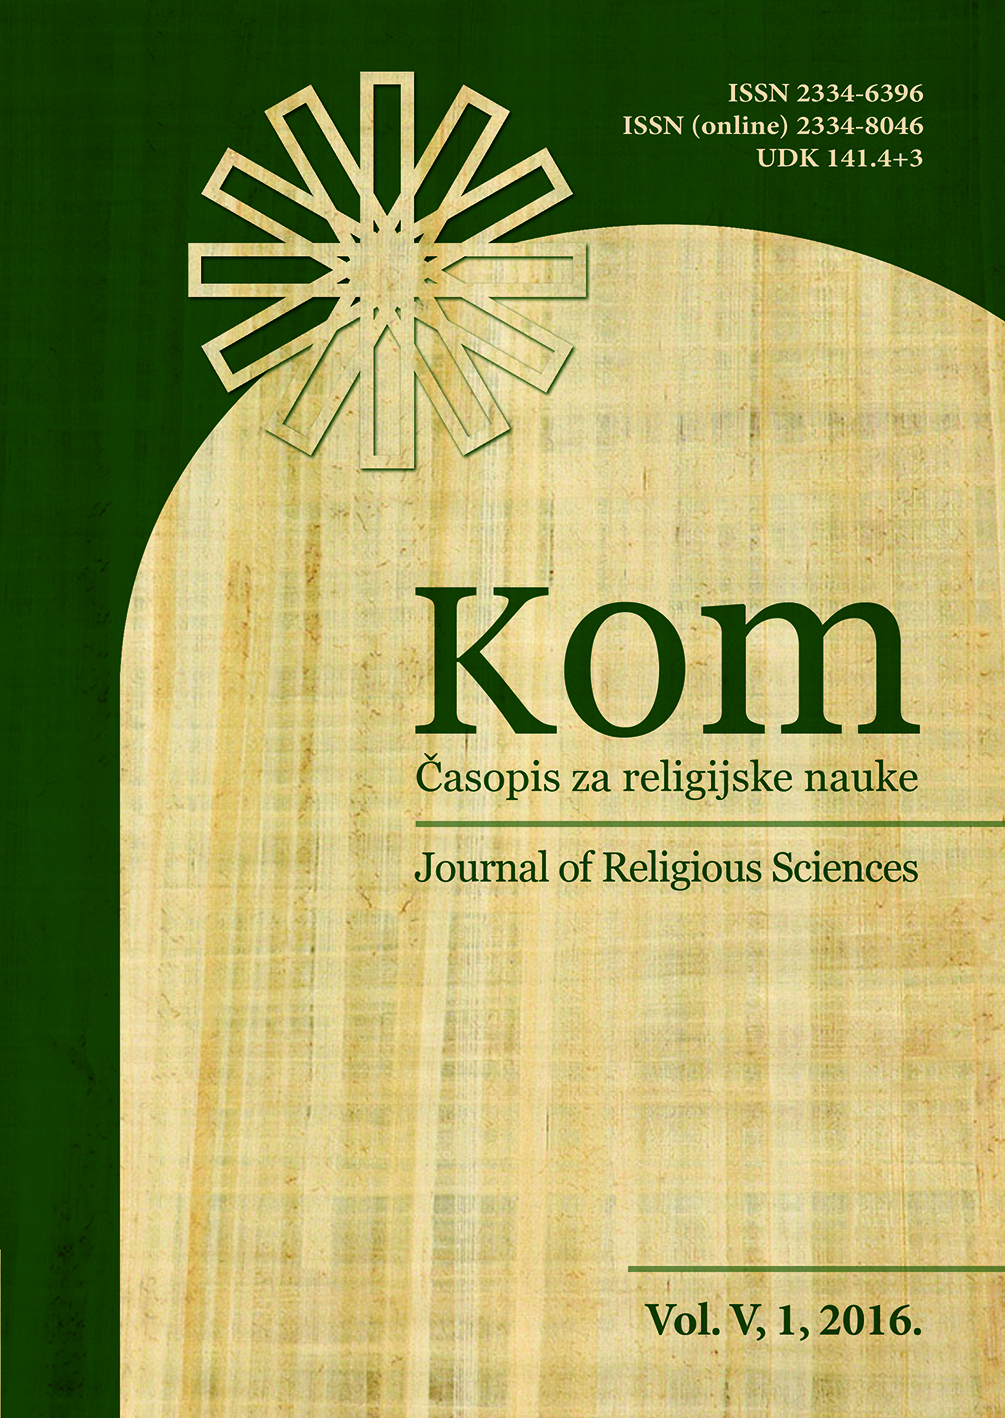 The Role of Religion in the Development of Communities: Comparison of Protestantism, Tokugawa and Islam